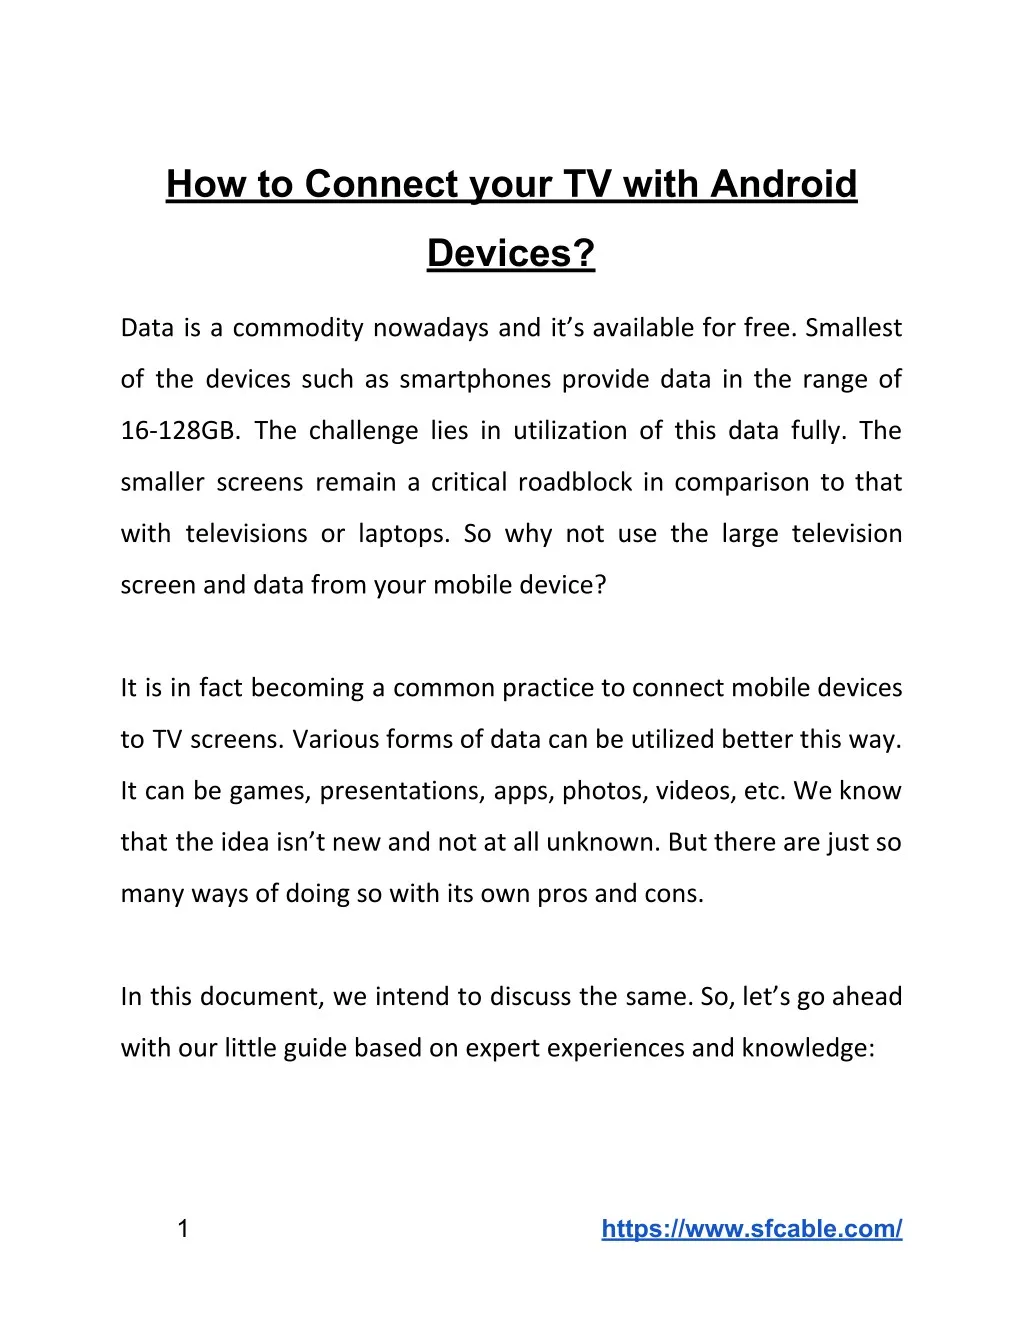 how to connect your tv with android